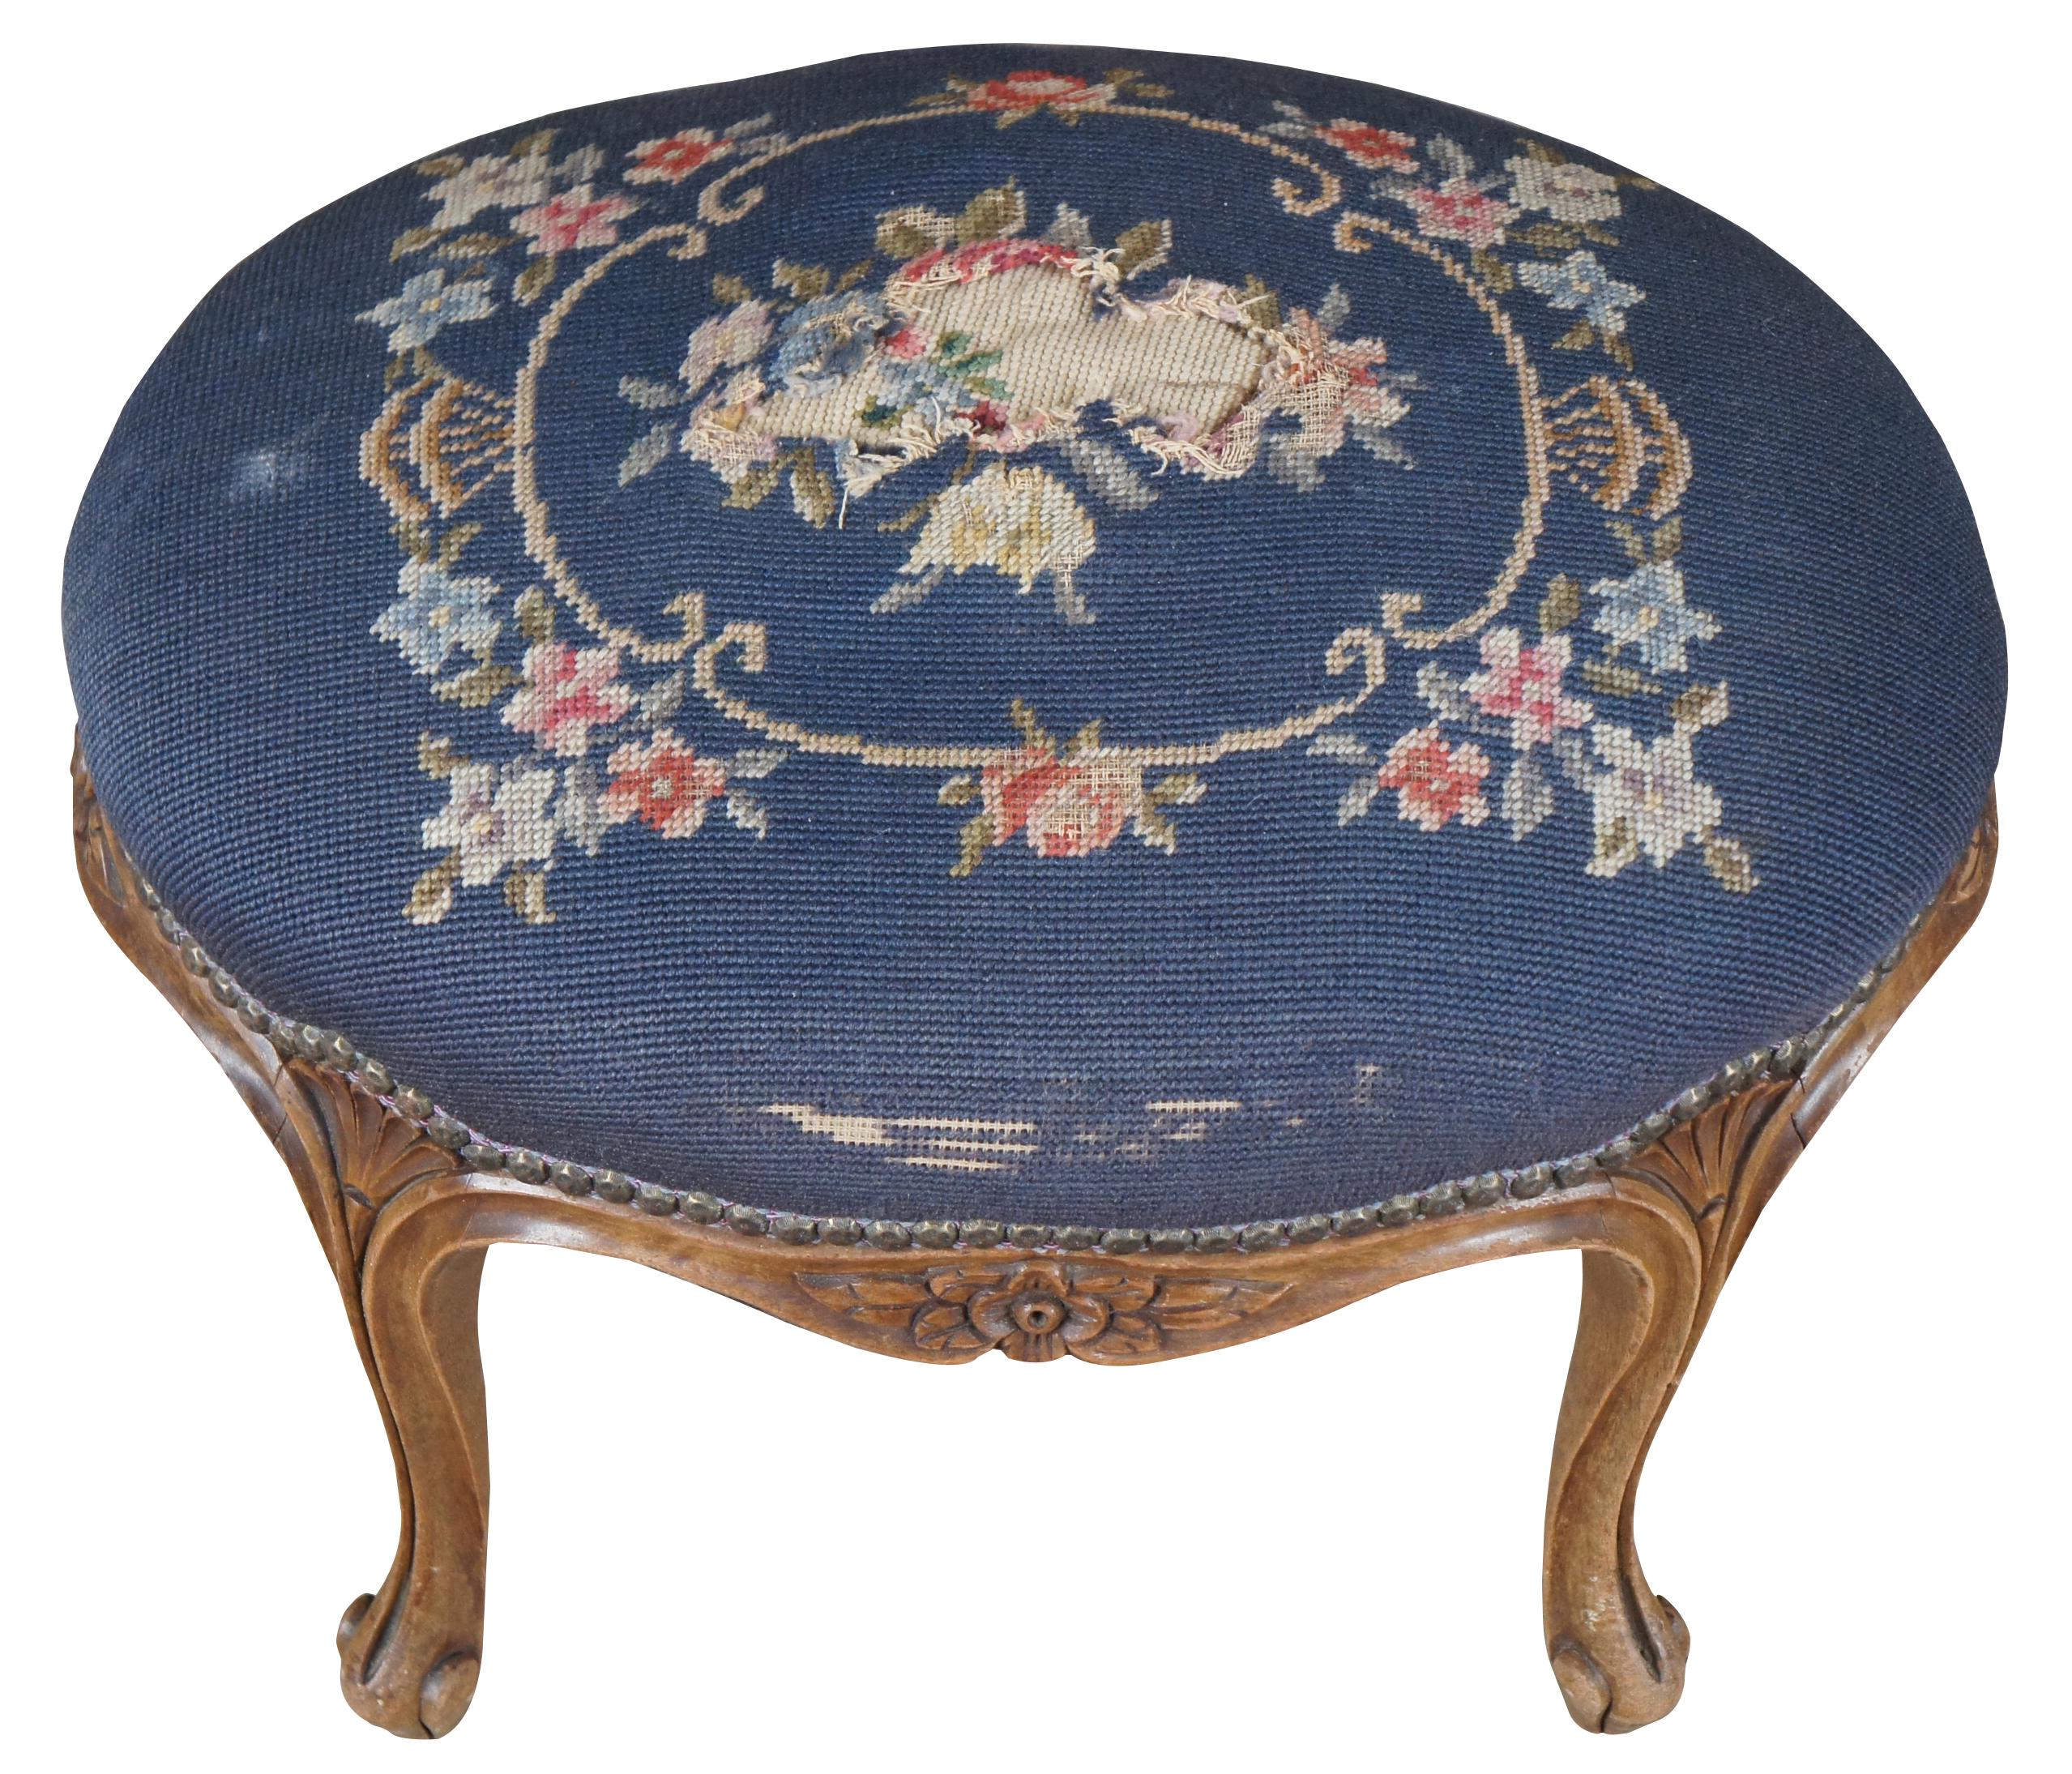 Antique French Provincial stool, foot rest or ottoman. Made of walnut featuring French styling with serpentine form with carved floral, fluted and scalloped accents, and needlepoint floral embroidered upholstery framed in nailhead trim. Measure: